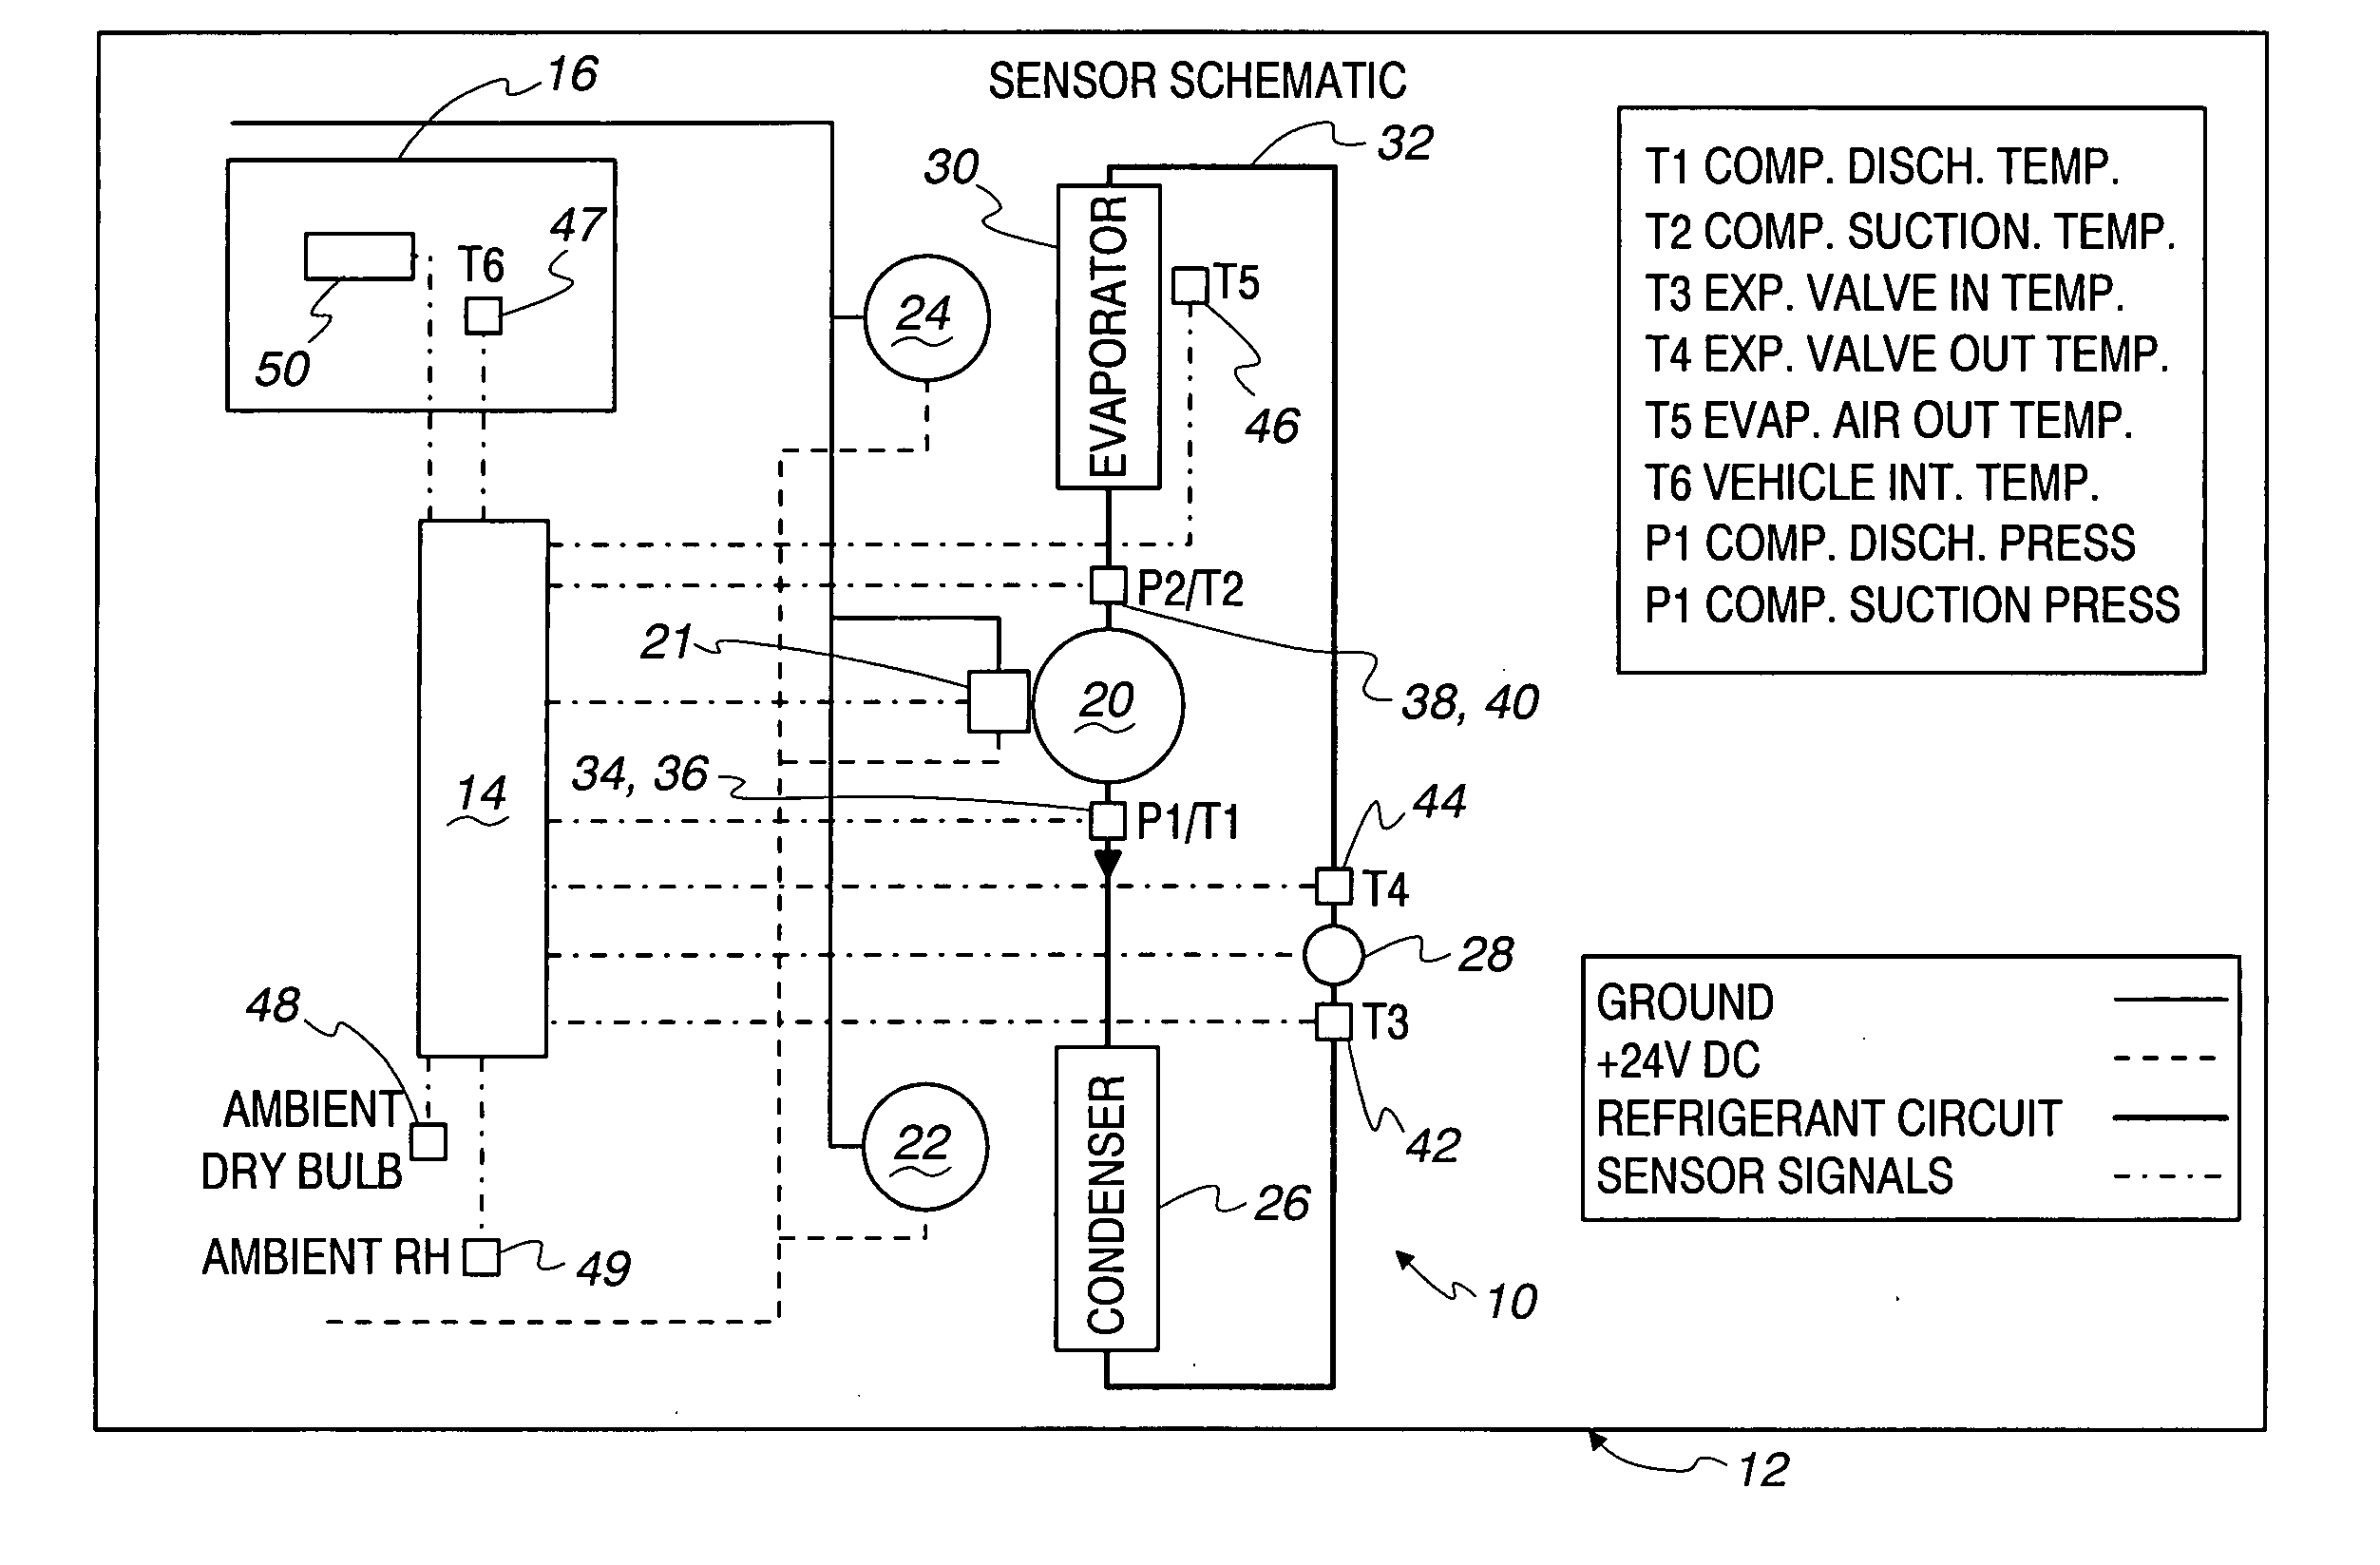 Energy efficient capacity control for an air conditioning system